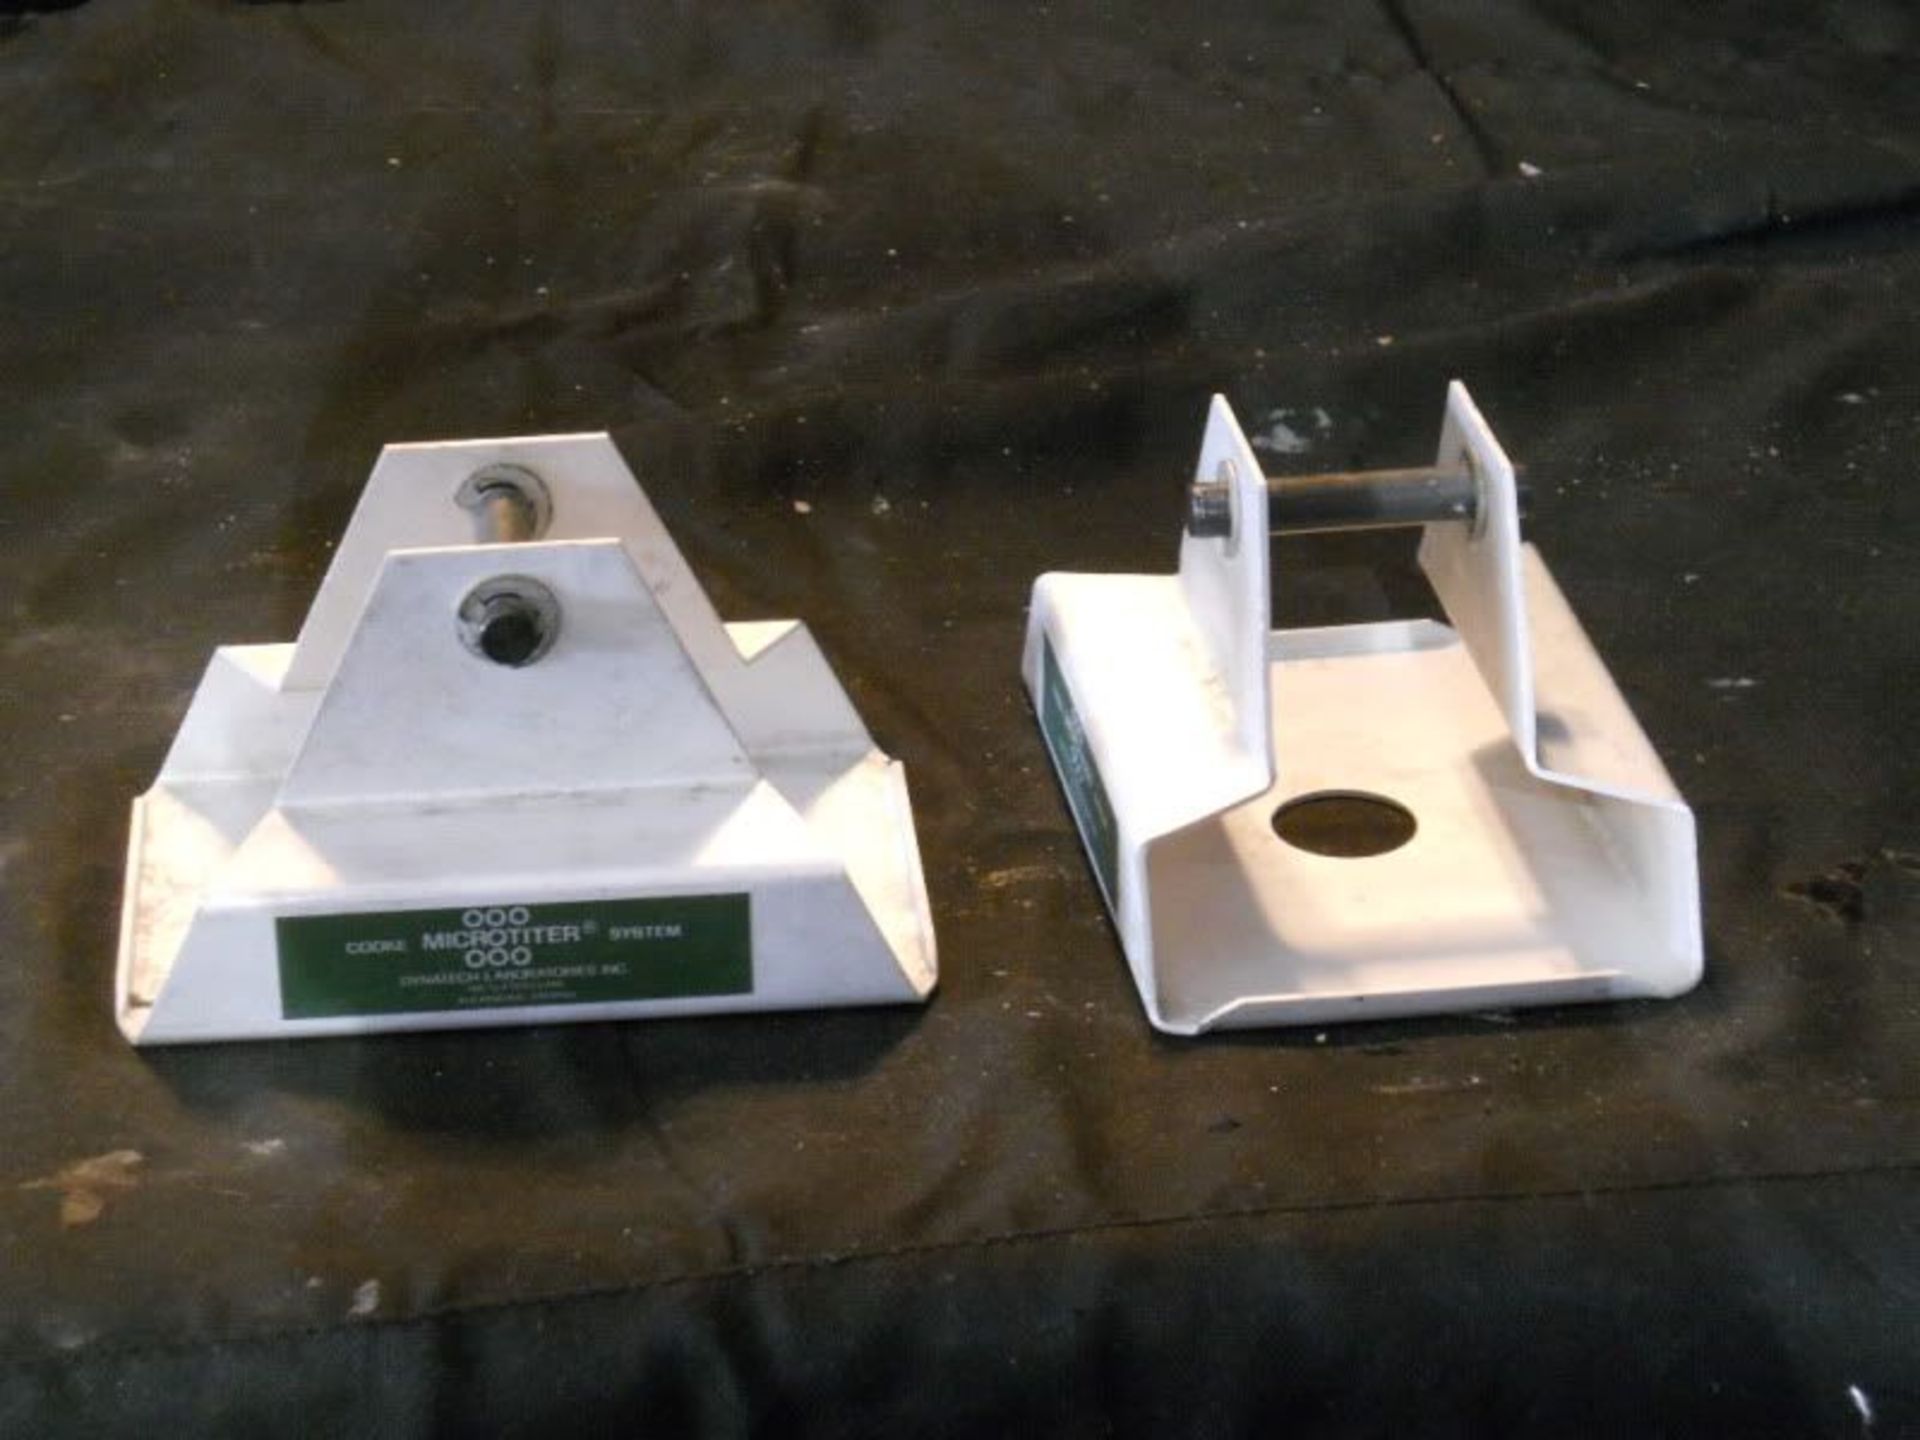 2 Cooke / Dynatech Microtiter System Microplate / Microtiter Carriers, Qty 1, 220939037078